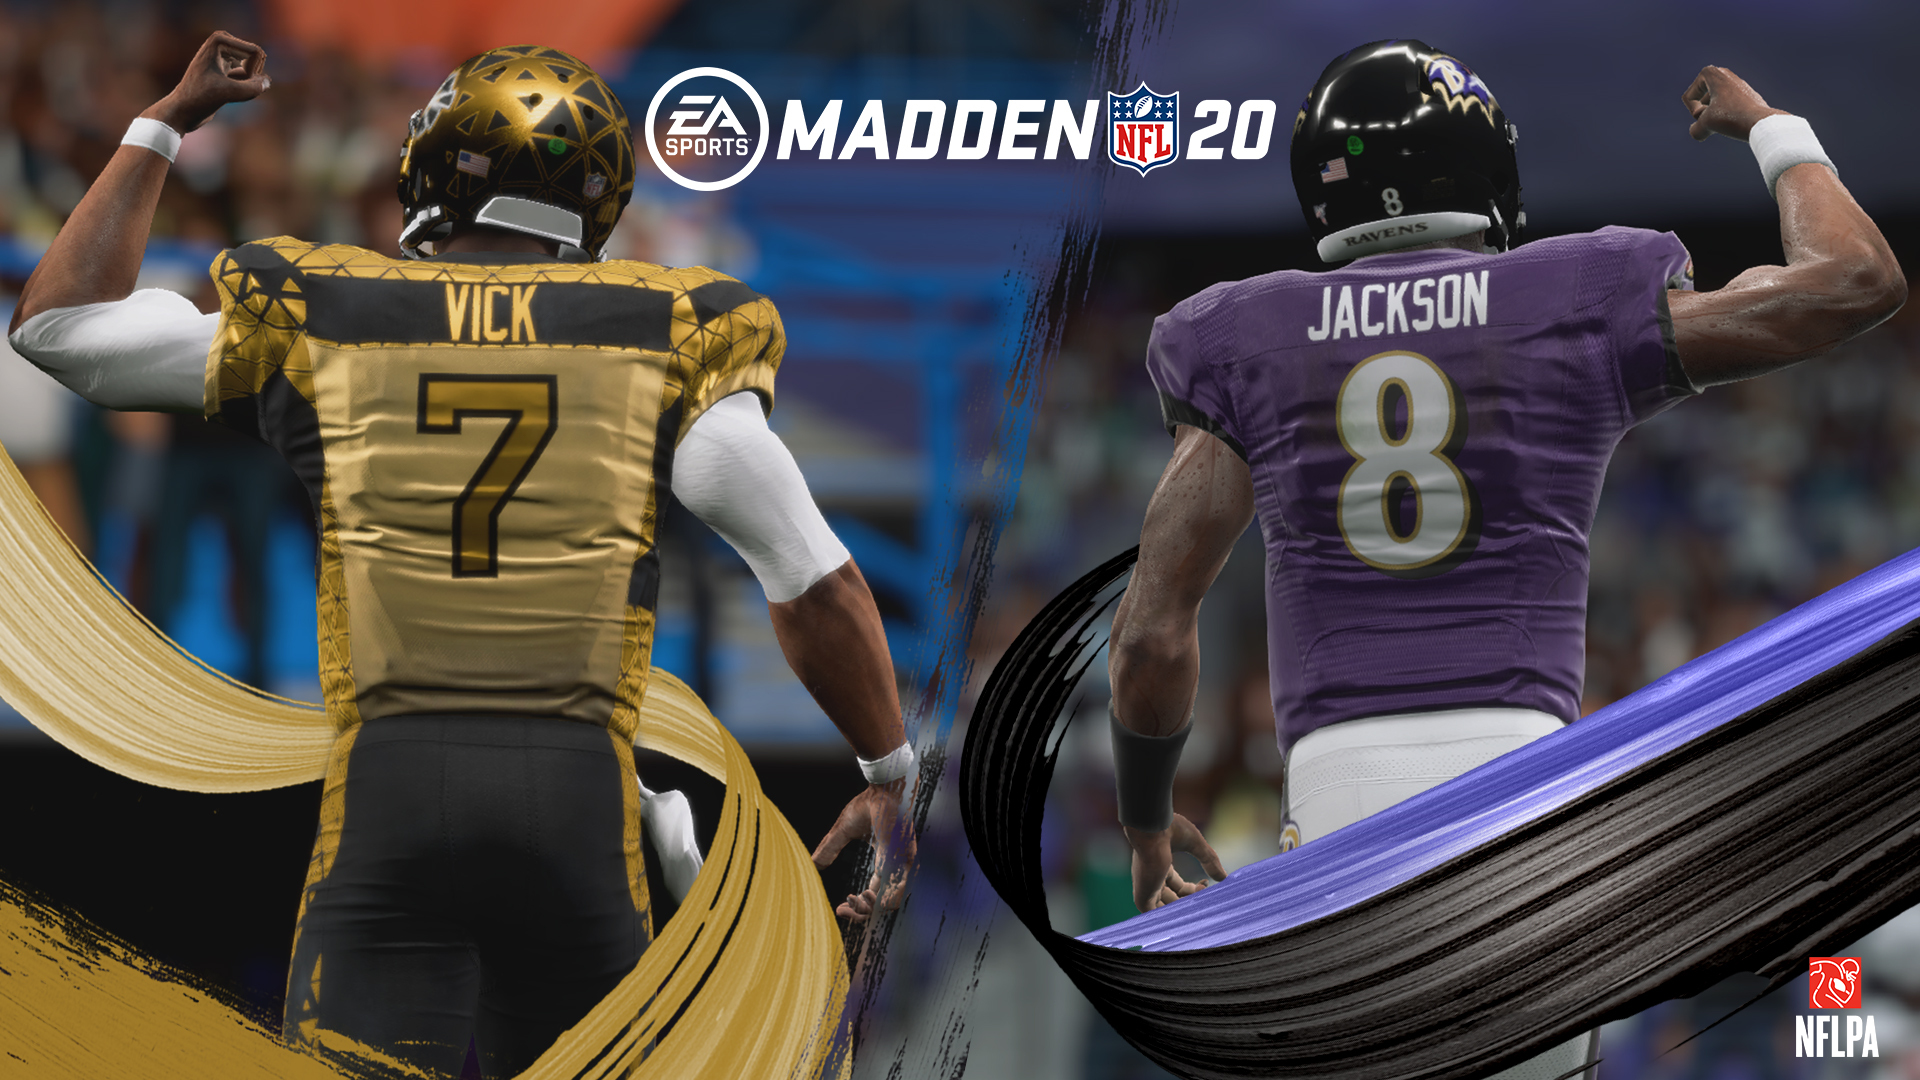 EA SPORTS Madden NFL 20 Welcomes the Most Players Ever